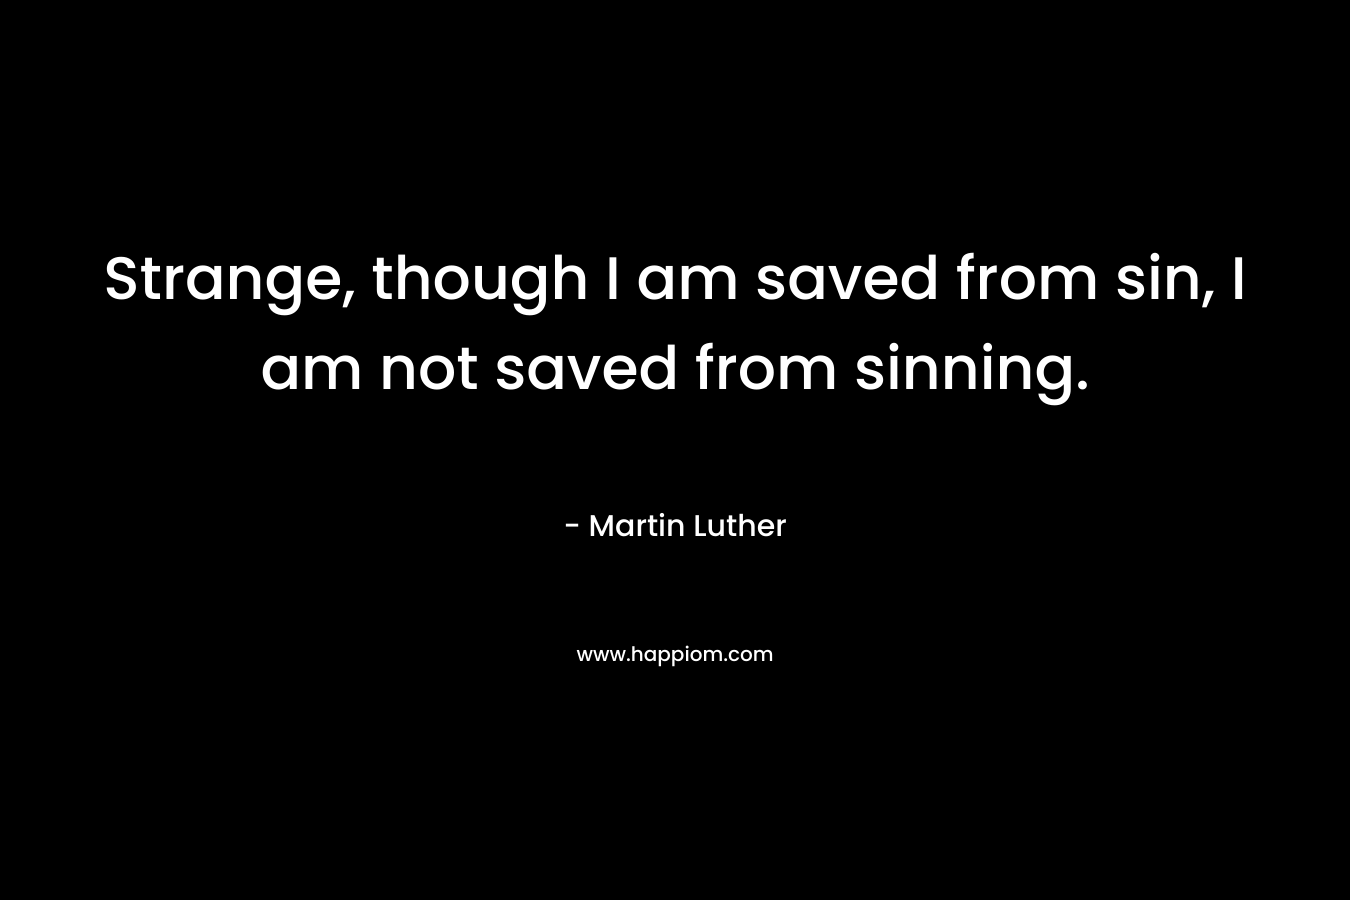 Strange, though I am saved from sin, I am not saved from sinning.